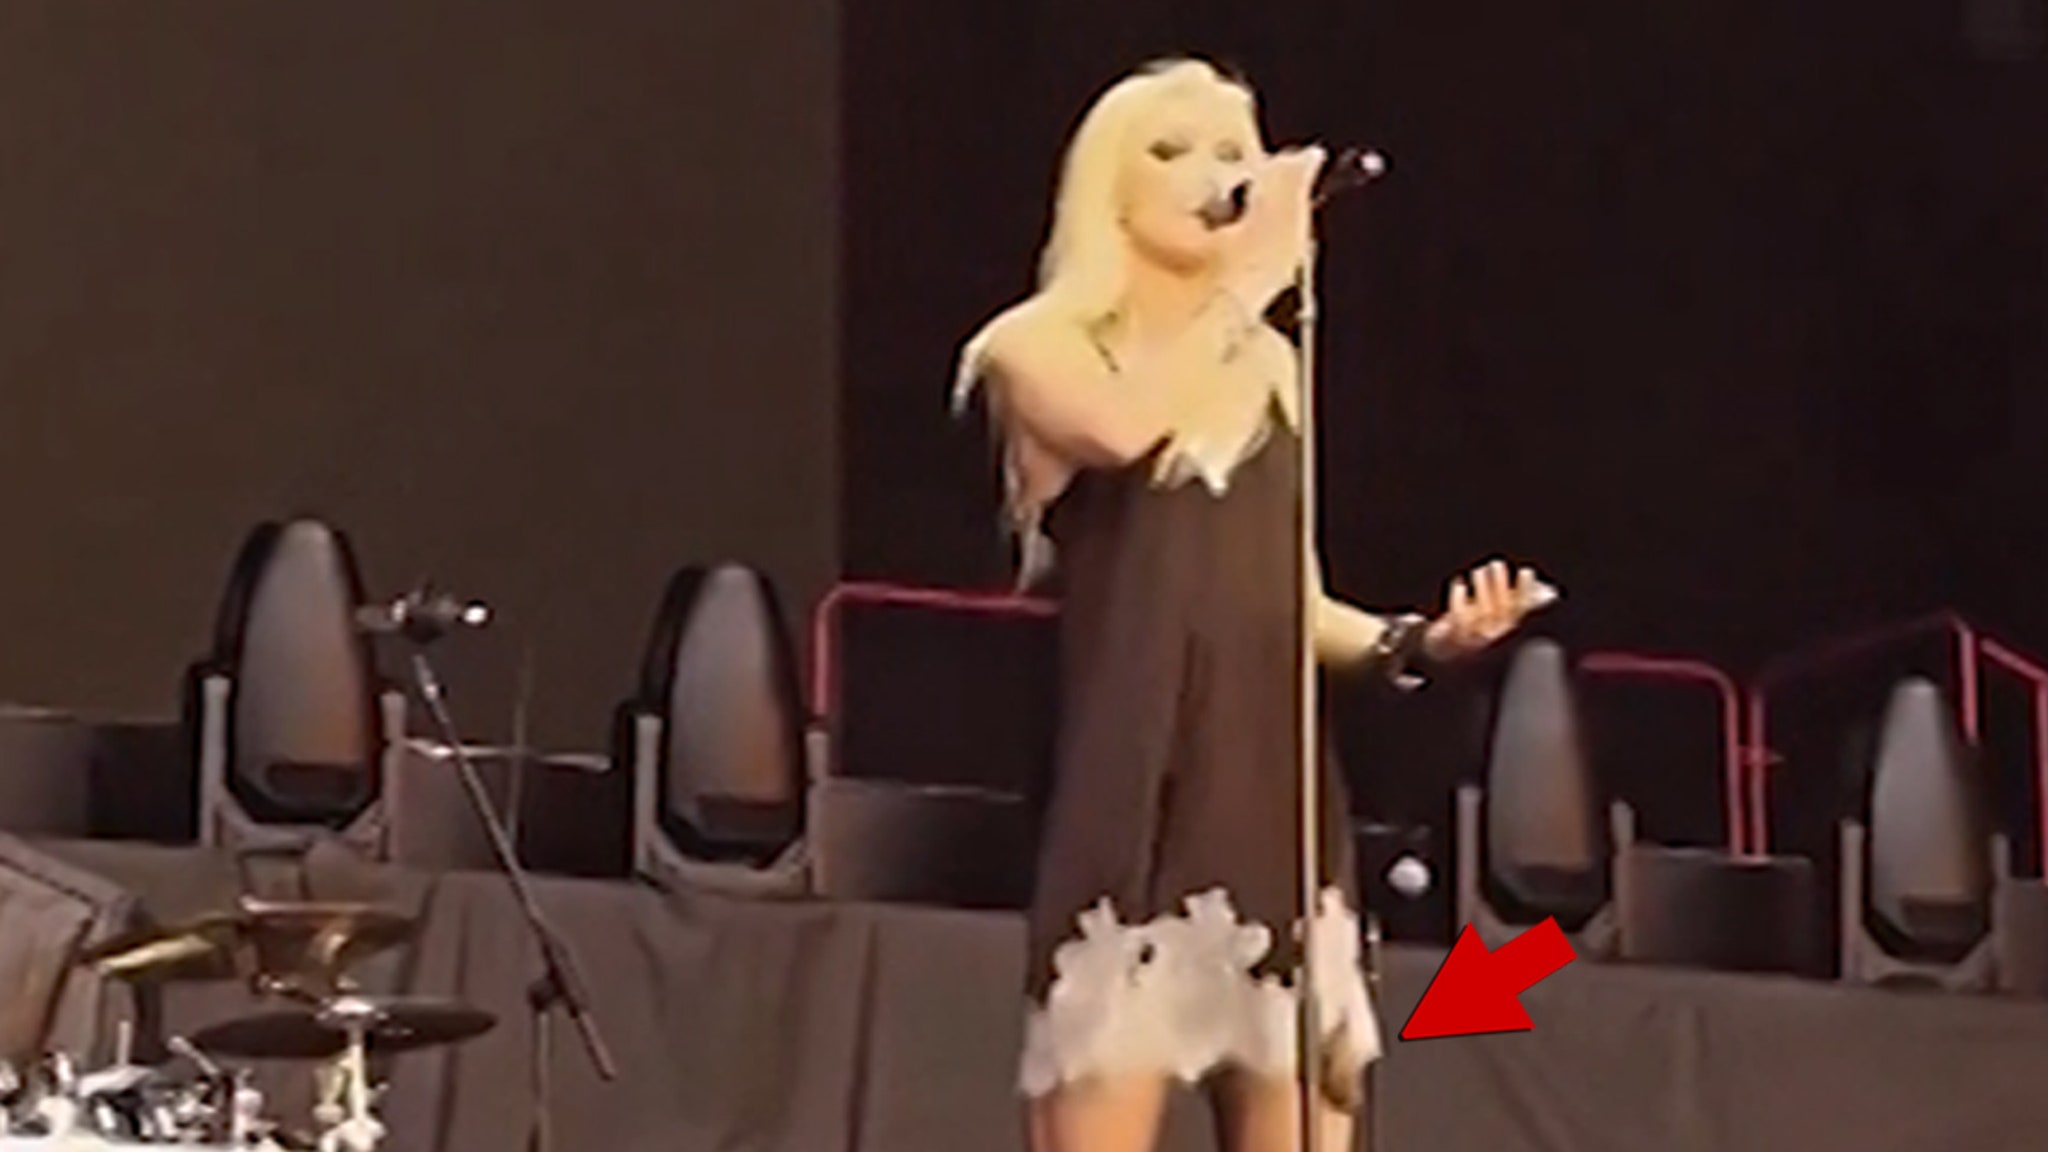 Gossip Girl star Taylor Momsen gets bitten by Pat on stage and receives rabies shot